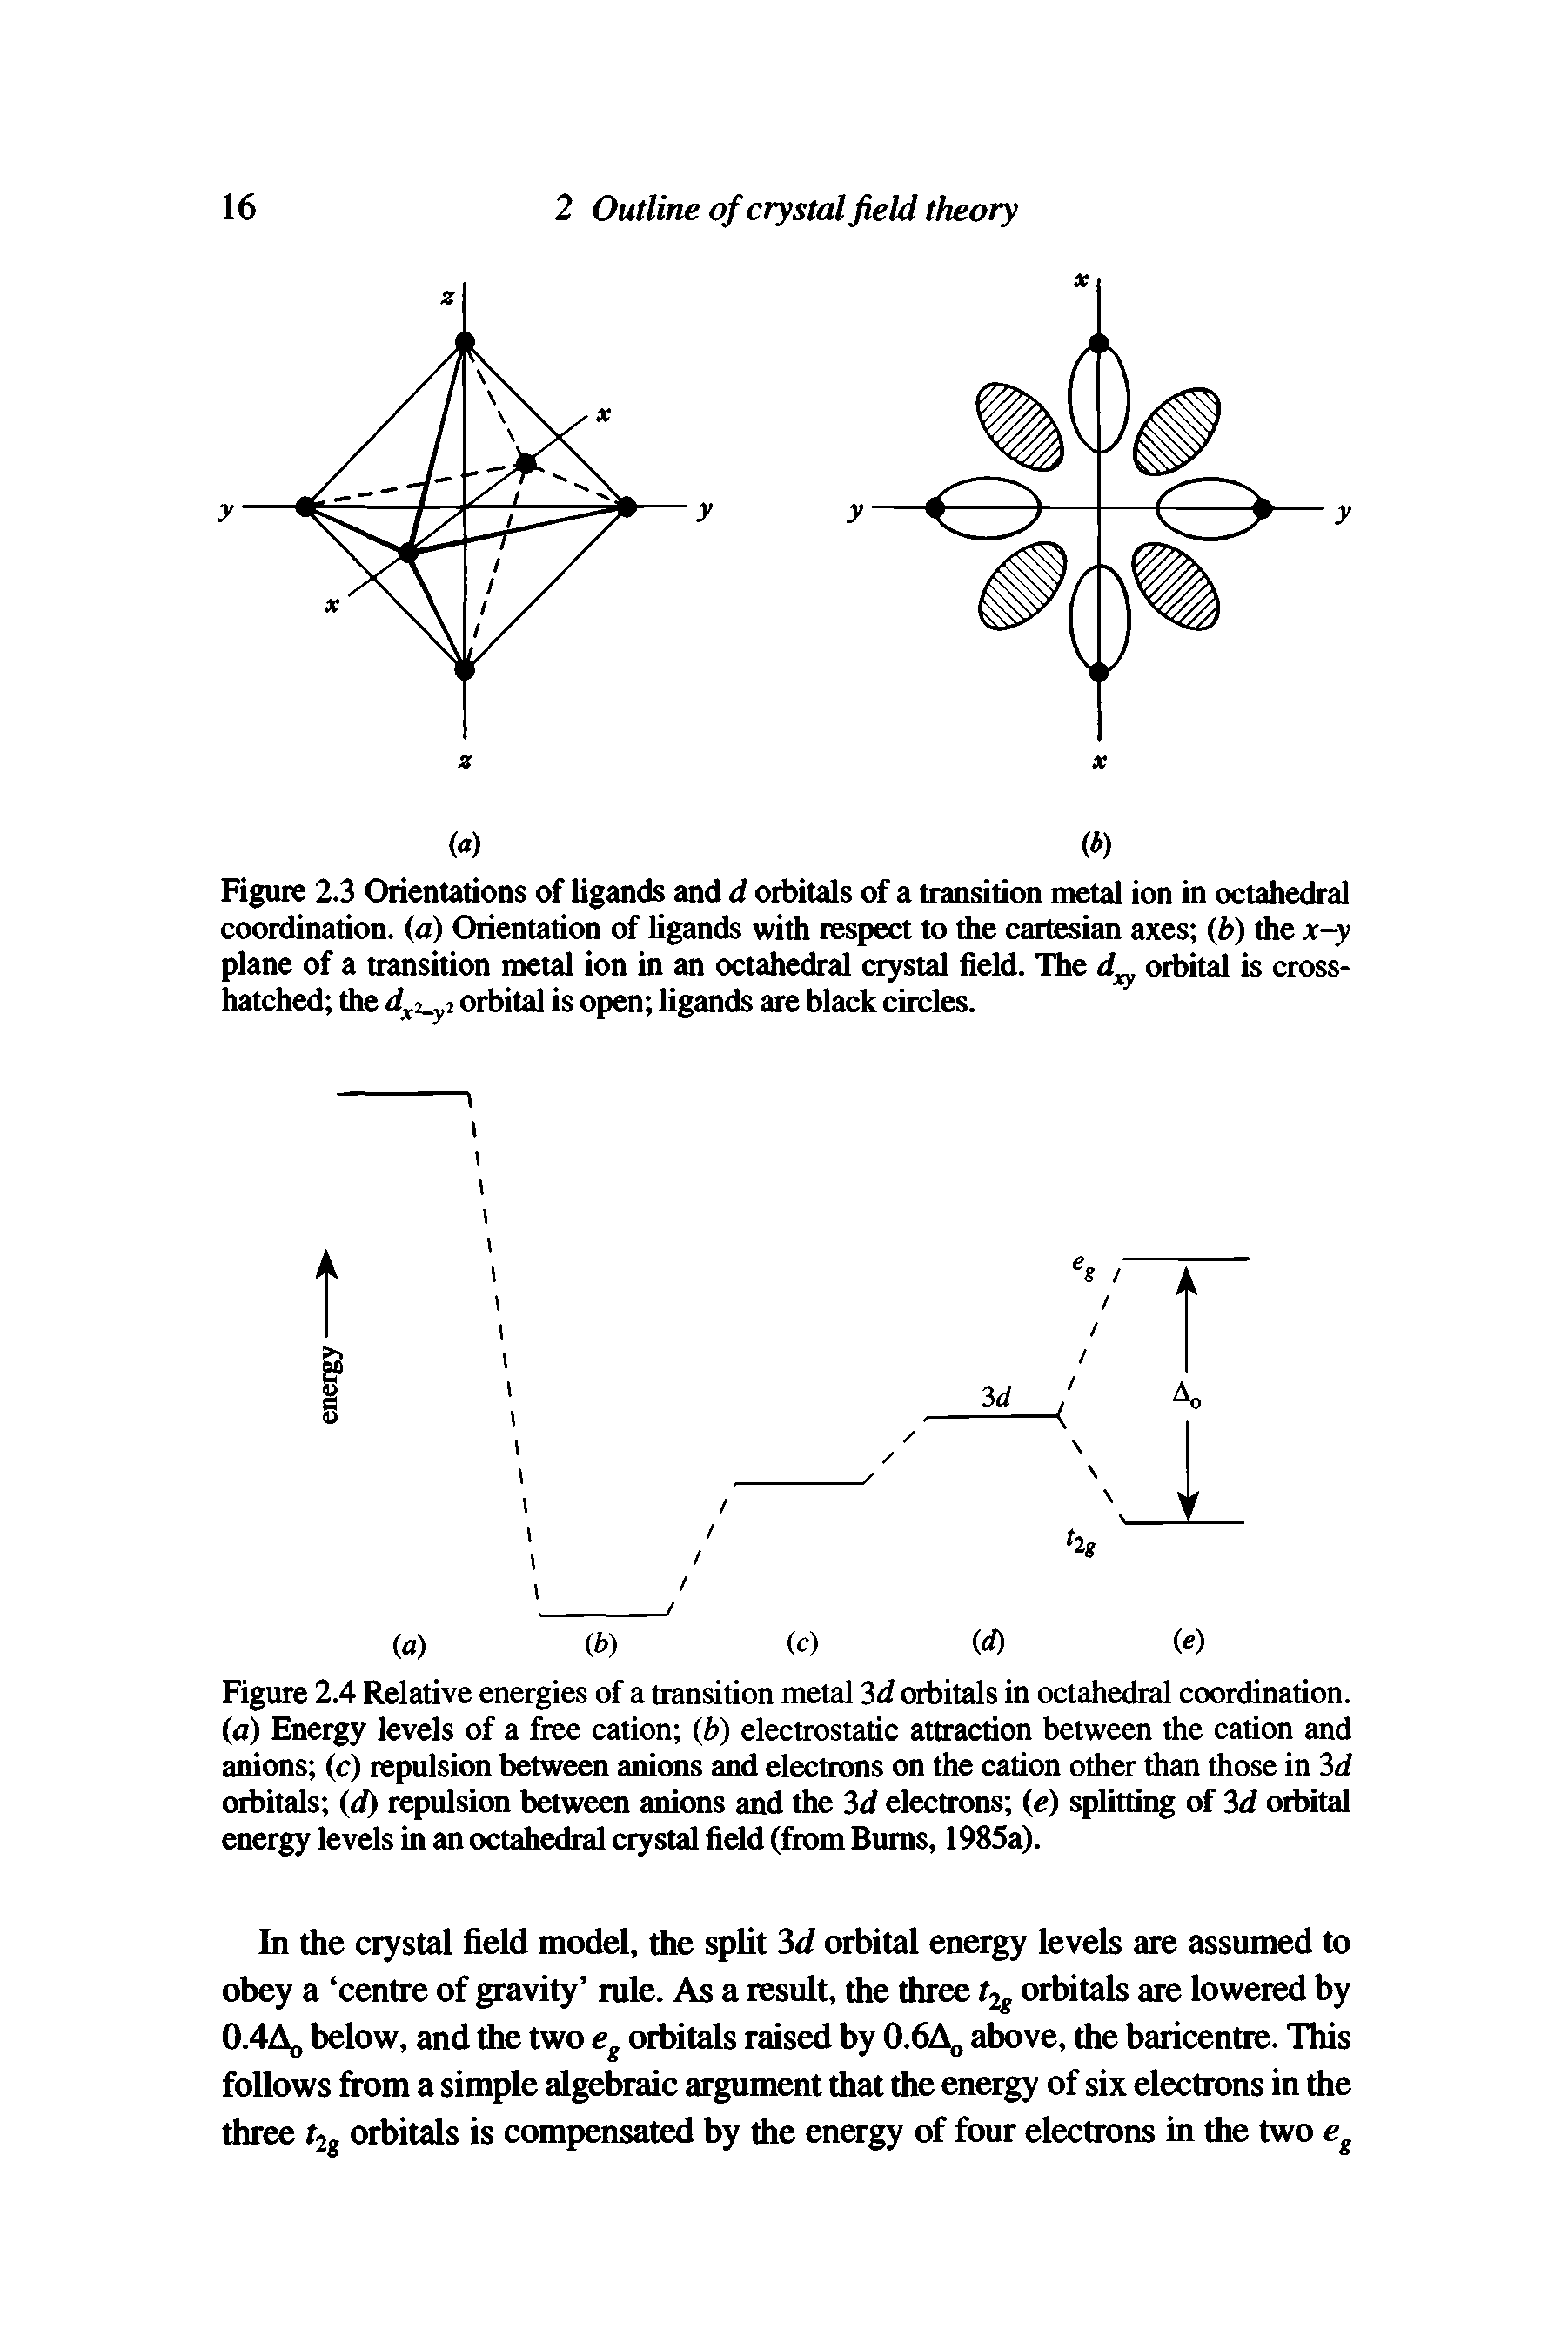 Figure 2.4 Relative energies of a transition metal 3d orbitals in octahedral coordination. (a) Energy levels of a free cation (b) electrostatic attraction between the cation and anions (c) repulsion between anions and electrons on the cation other than those in 3d orbitals id) repulsion between anions and the 3d electrons (e) splitting of 3d orbital energy levels in an octahedral crystal field (from Bums, 1985a).